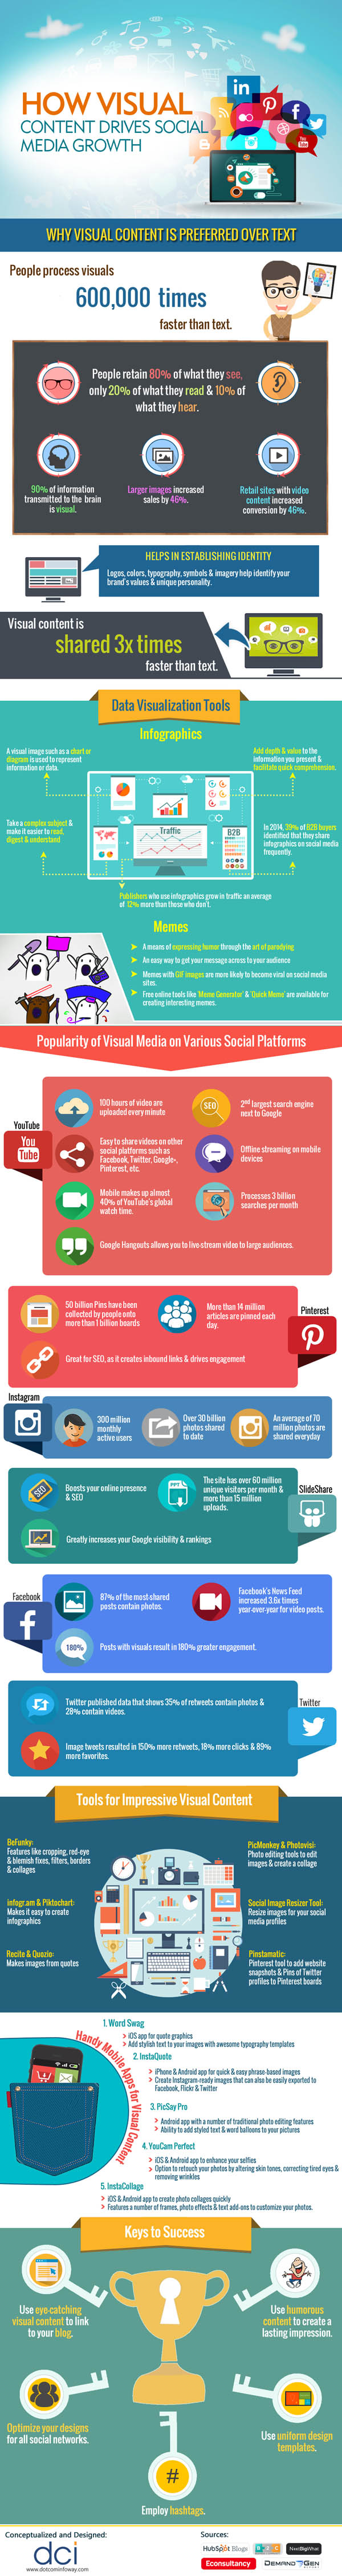 How Visual Content Drives Social Media Growth Infographic Smashfreakz